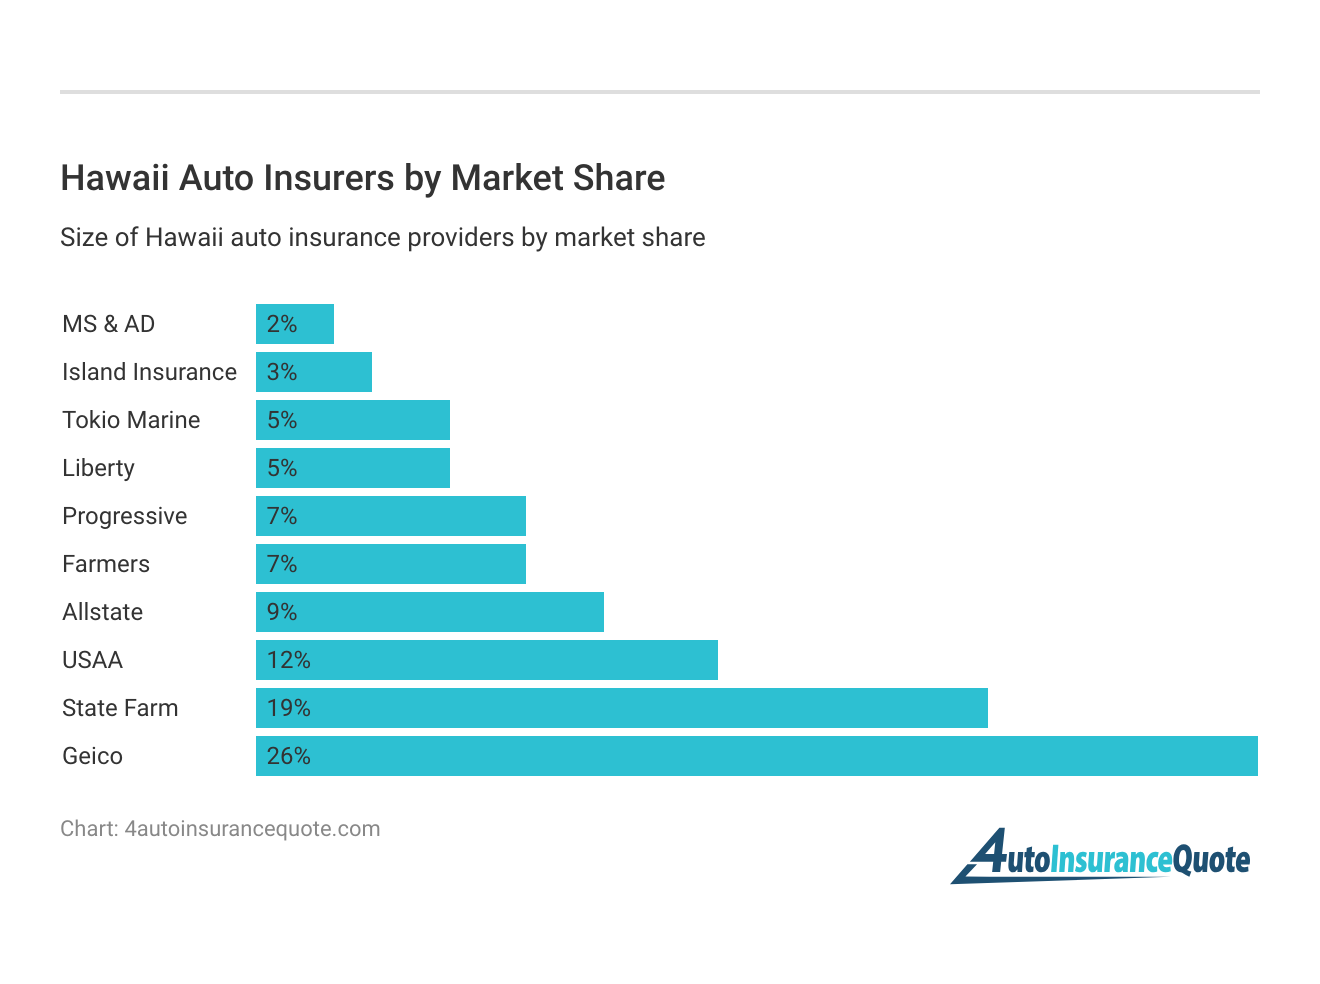 <h3>Hawaii Auto Insurers by Market Share</h3>